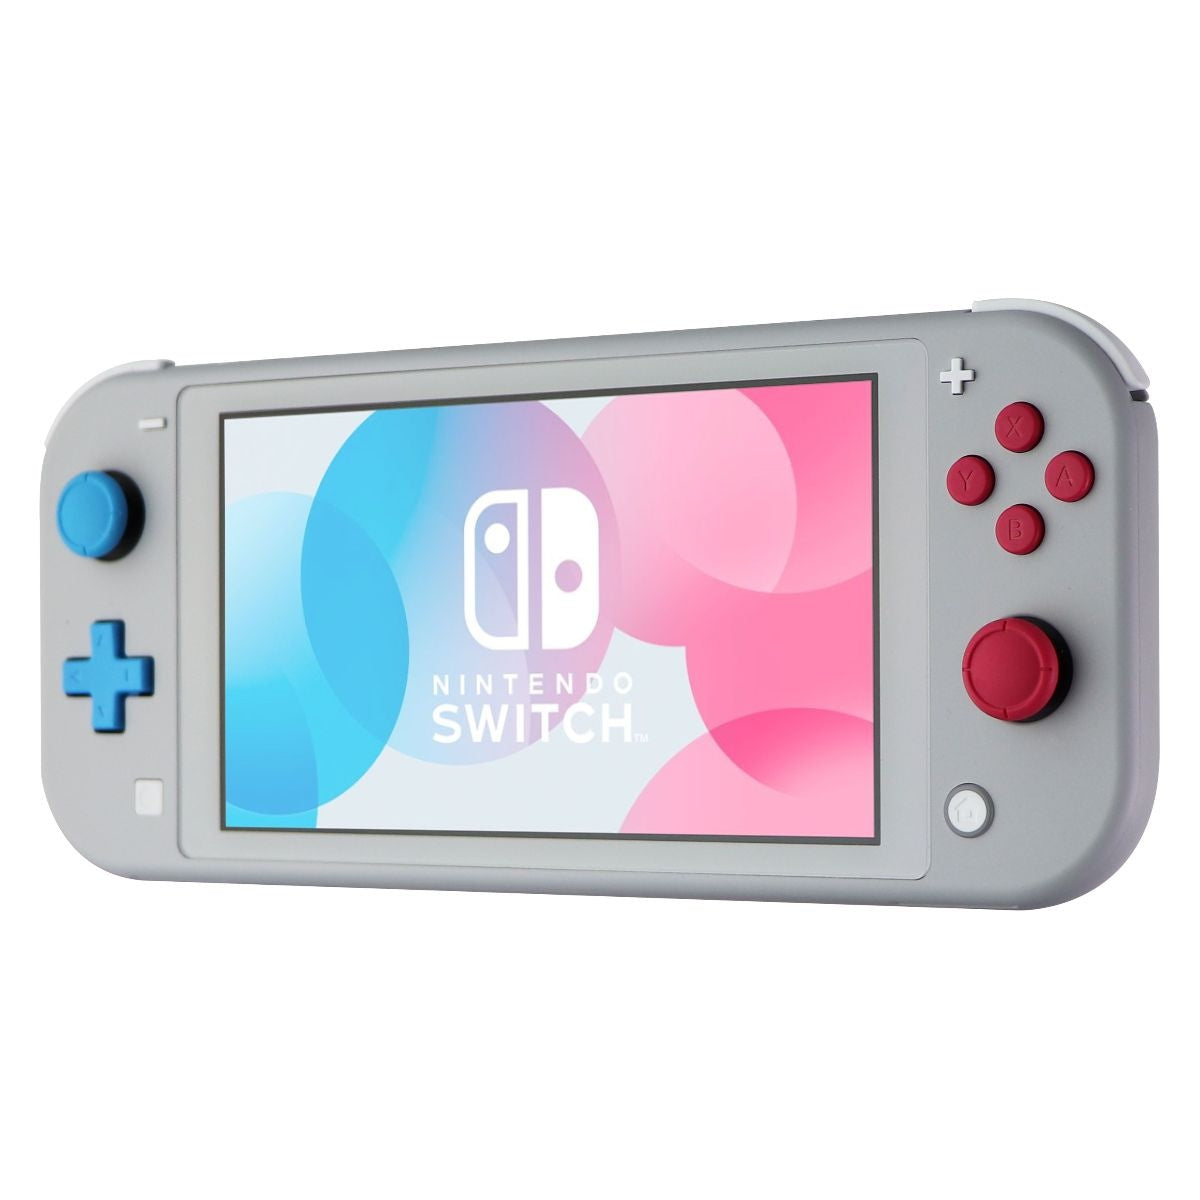 Nintendo Switch Lite - Pokemon Sword and Shield Edition - Light Gray (HDH-001) Gaming/Console - Video Game Consoles Nintendo    - Simple Cell Bulk Wholesale Pricing - USA Seller